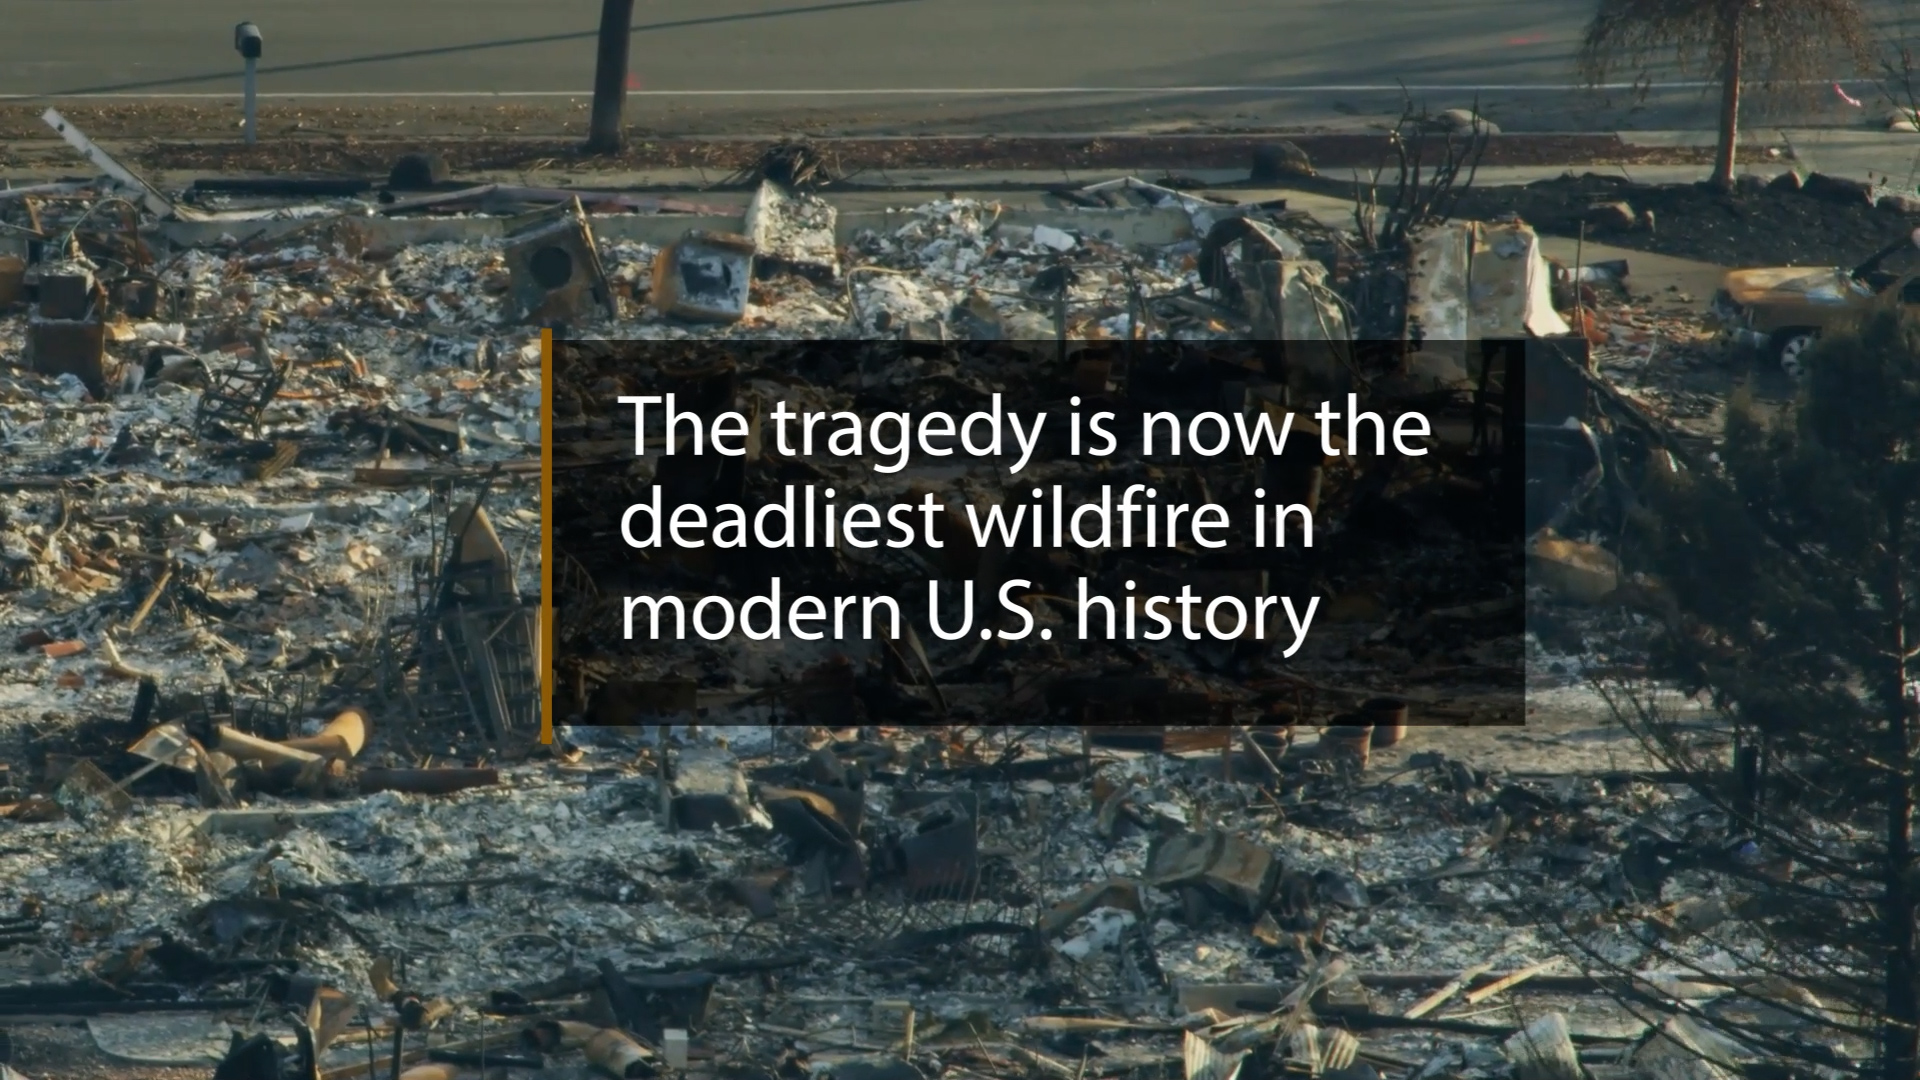 wildfire banner with image of disaster behind text